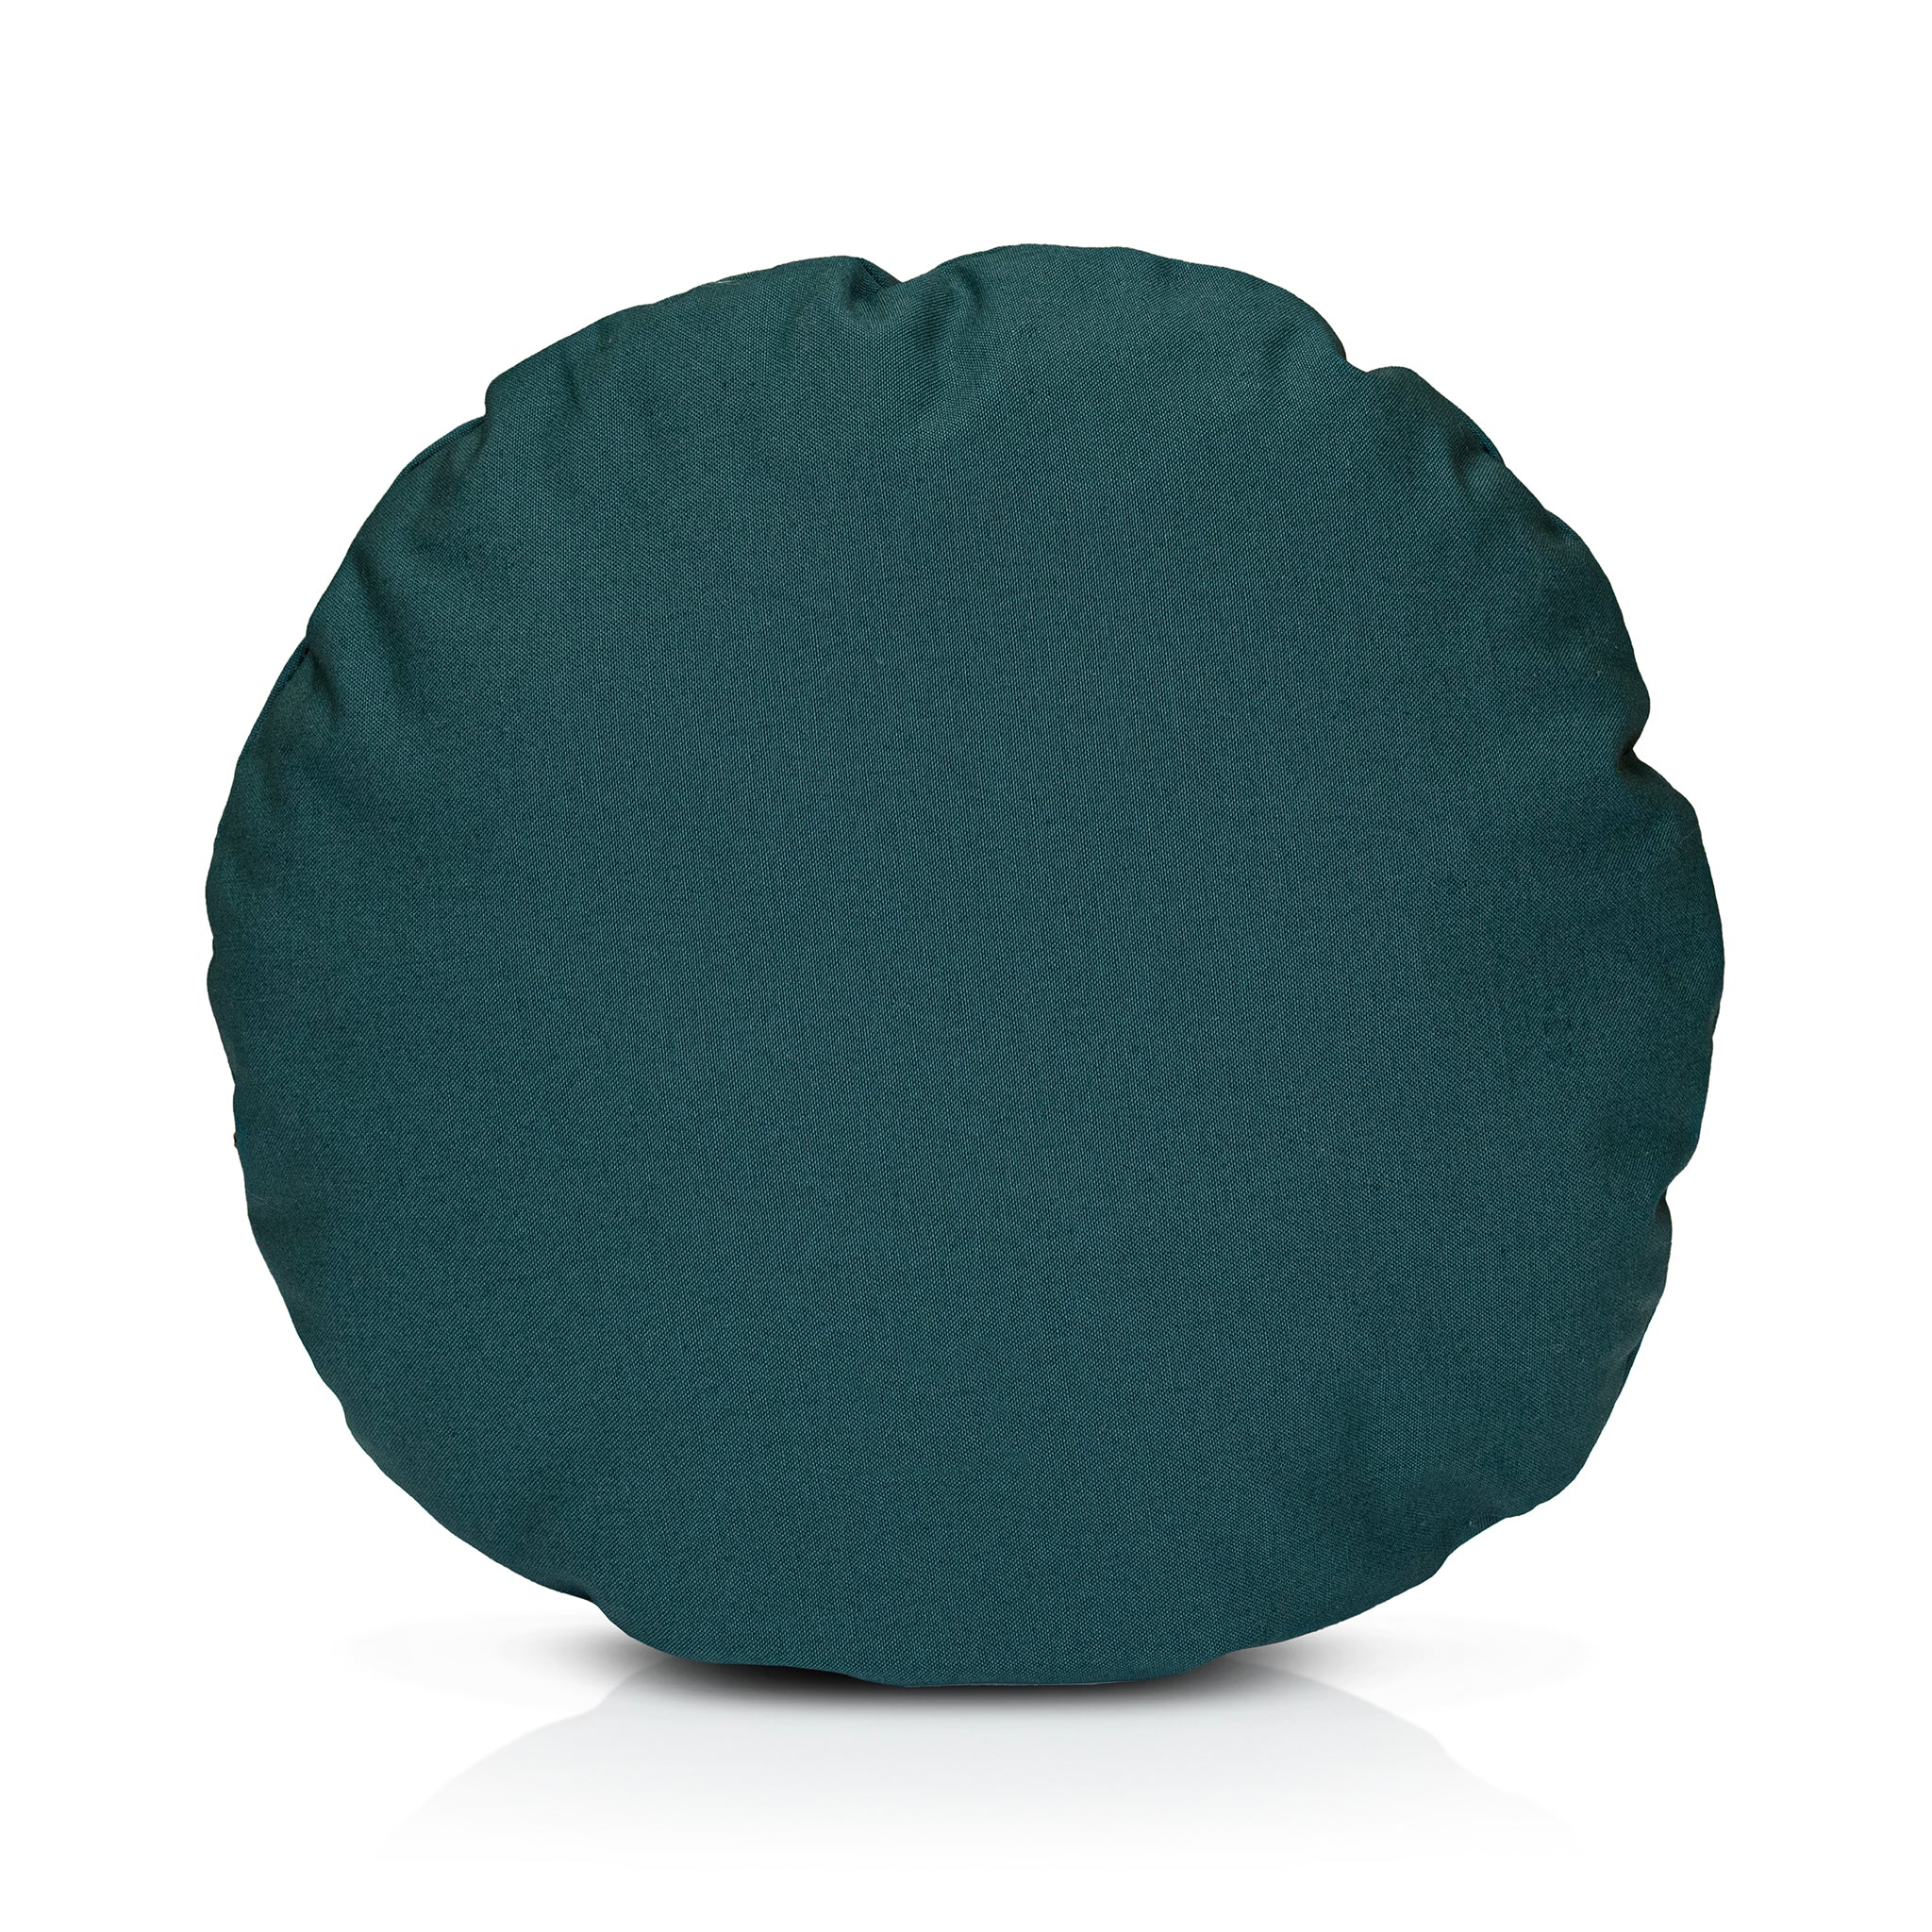 A chimney sheep PetSnug wool filled cushion. The wool cushion sits upon a white background. This is a large green cushion.